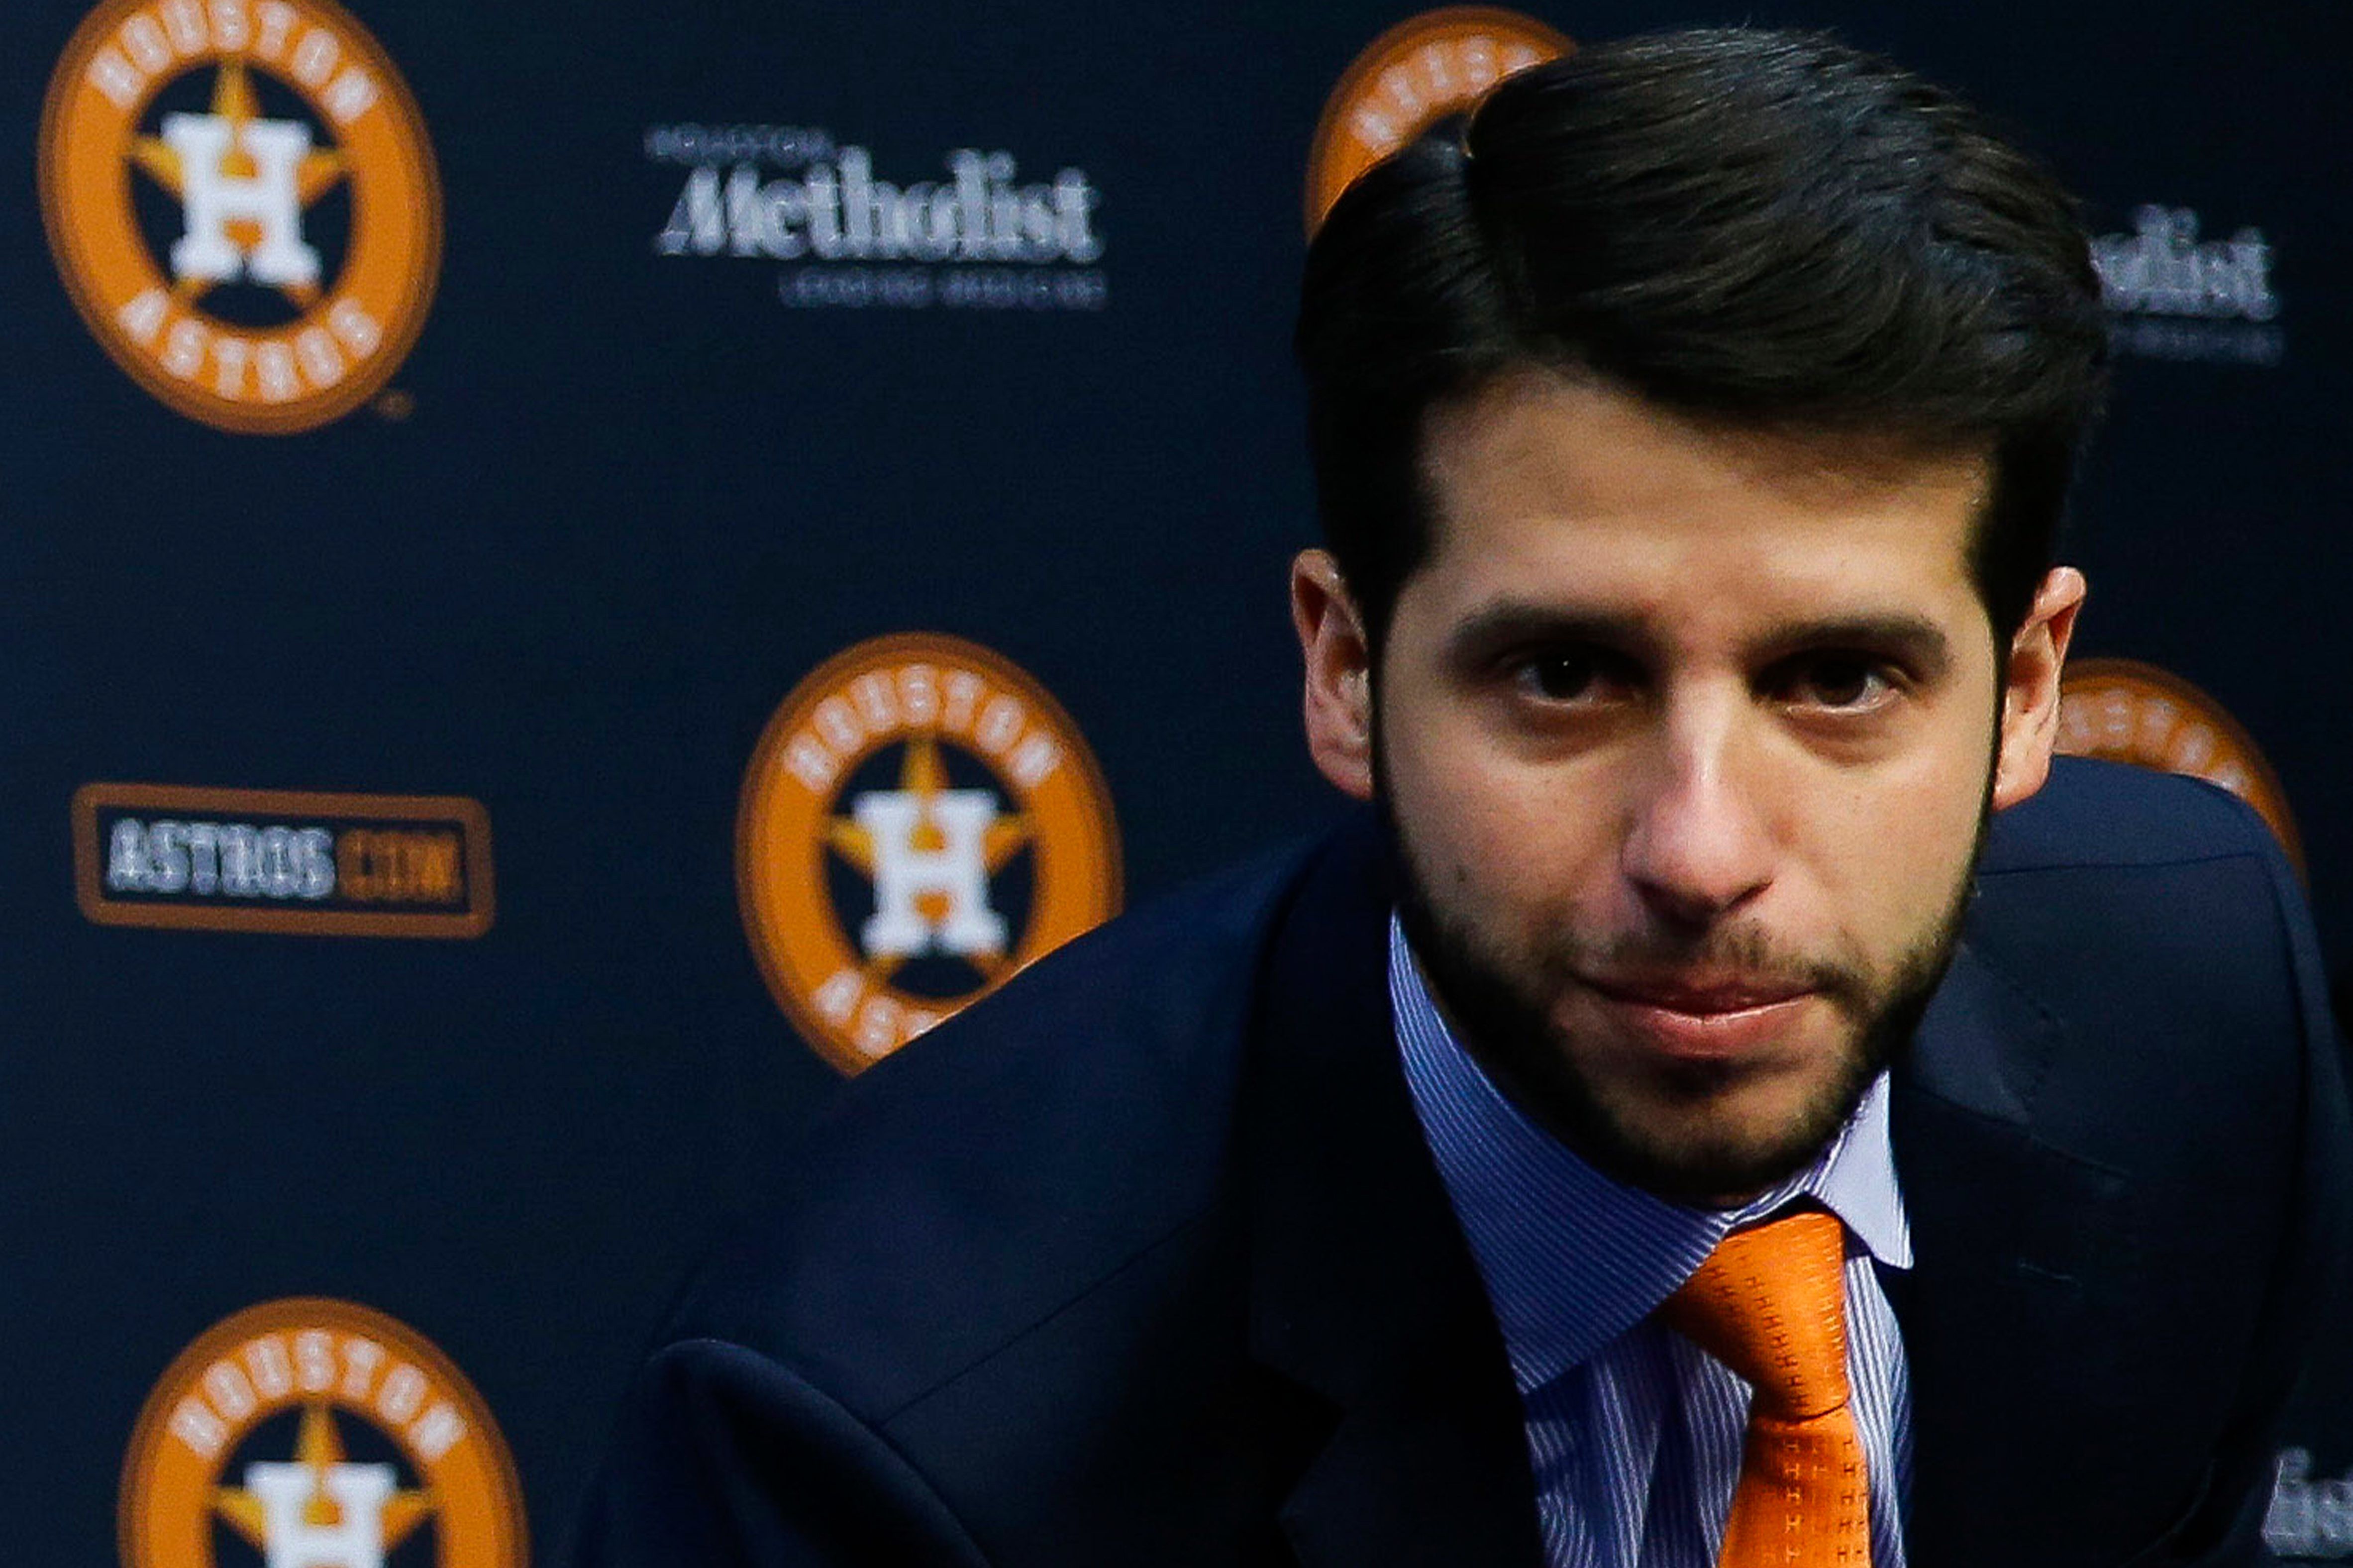 Astros Fire Assistant GM Brandon Taubman Over Osuna Comments to Female Reporters